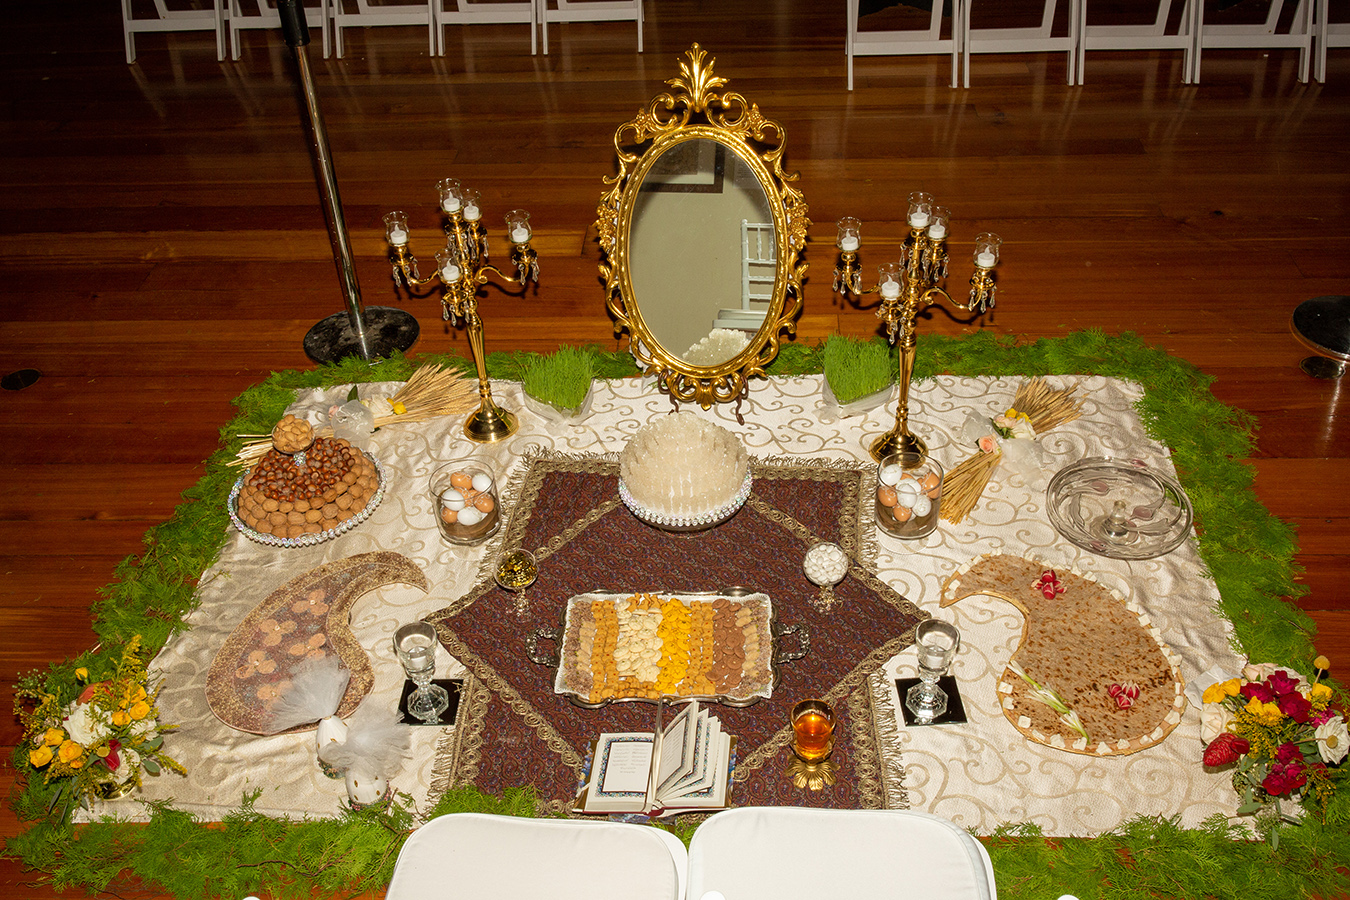 The "Sofreh Aghd" included Rue Seeds, Traditional Pastries, Mirror and two candelabras, Bread, feta cheese, and greens, Decorated eggs, almonds, walnuts and hazelnuts, Fruits: pomegranates, grapes, apples; Gold Coins; Hafez's Divan, and an Antique Paisley Rug.